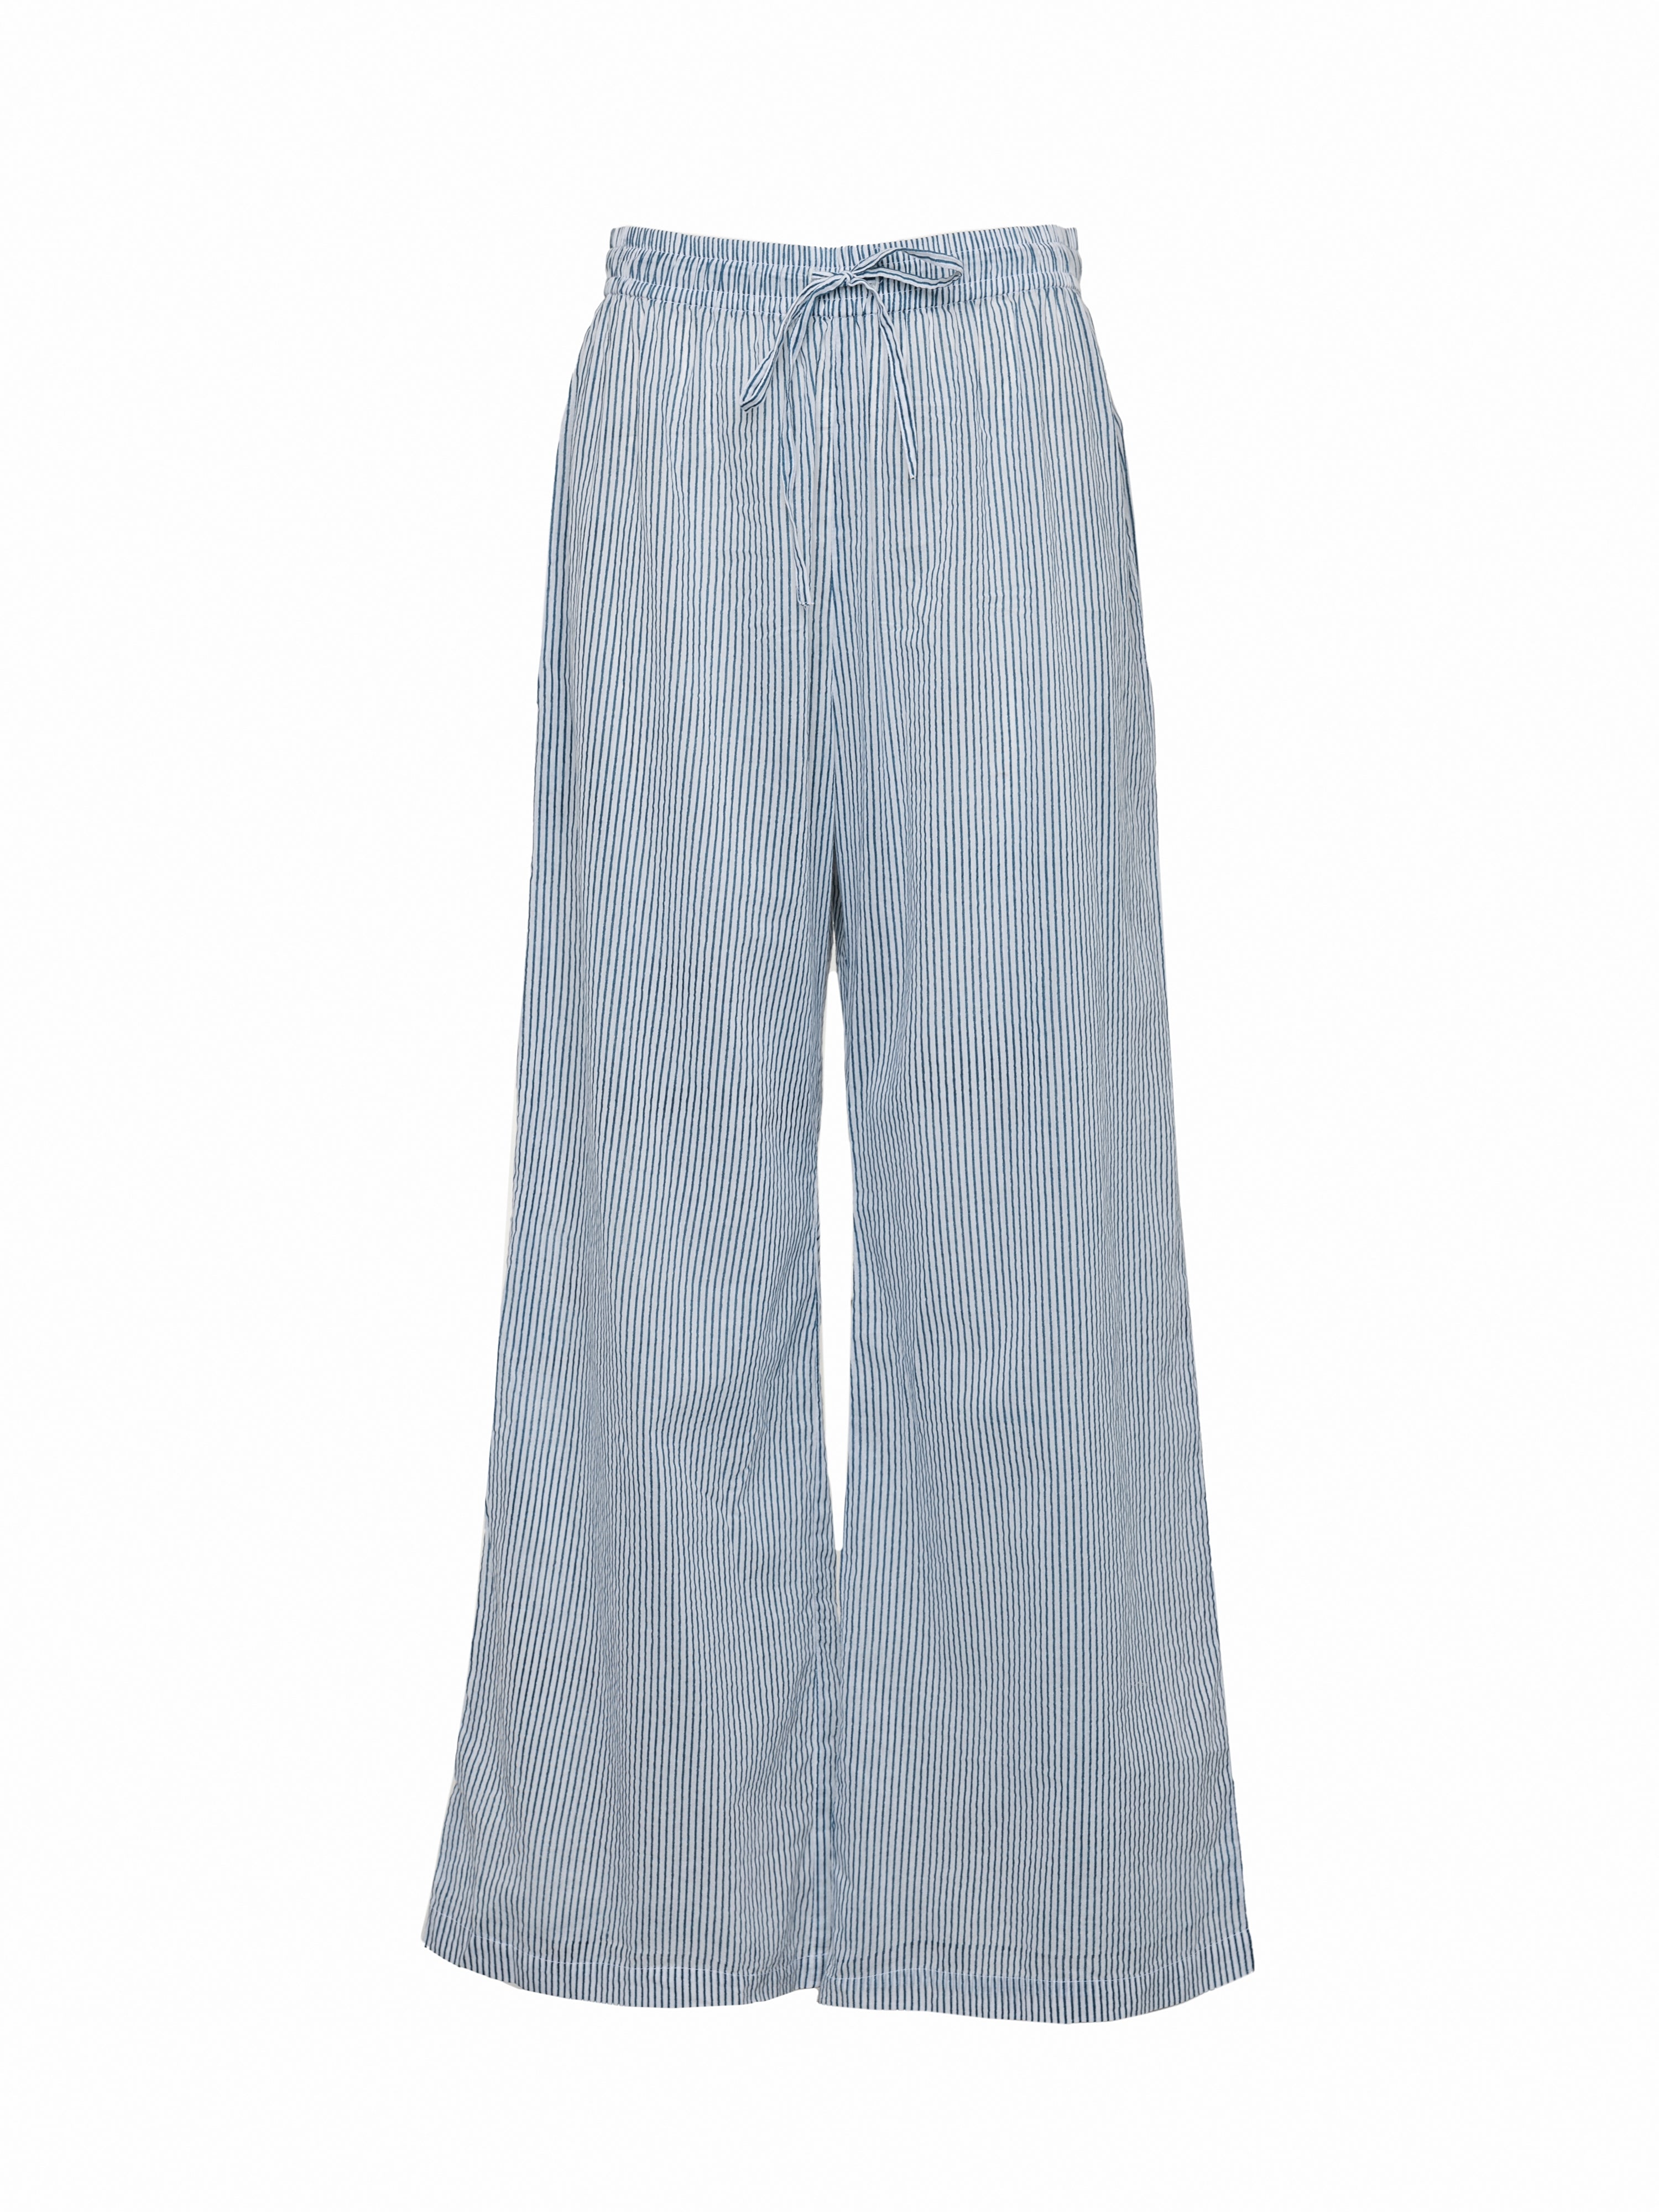 Palazzo Pants - Blue Stripe by Desert Queen